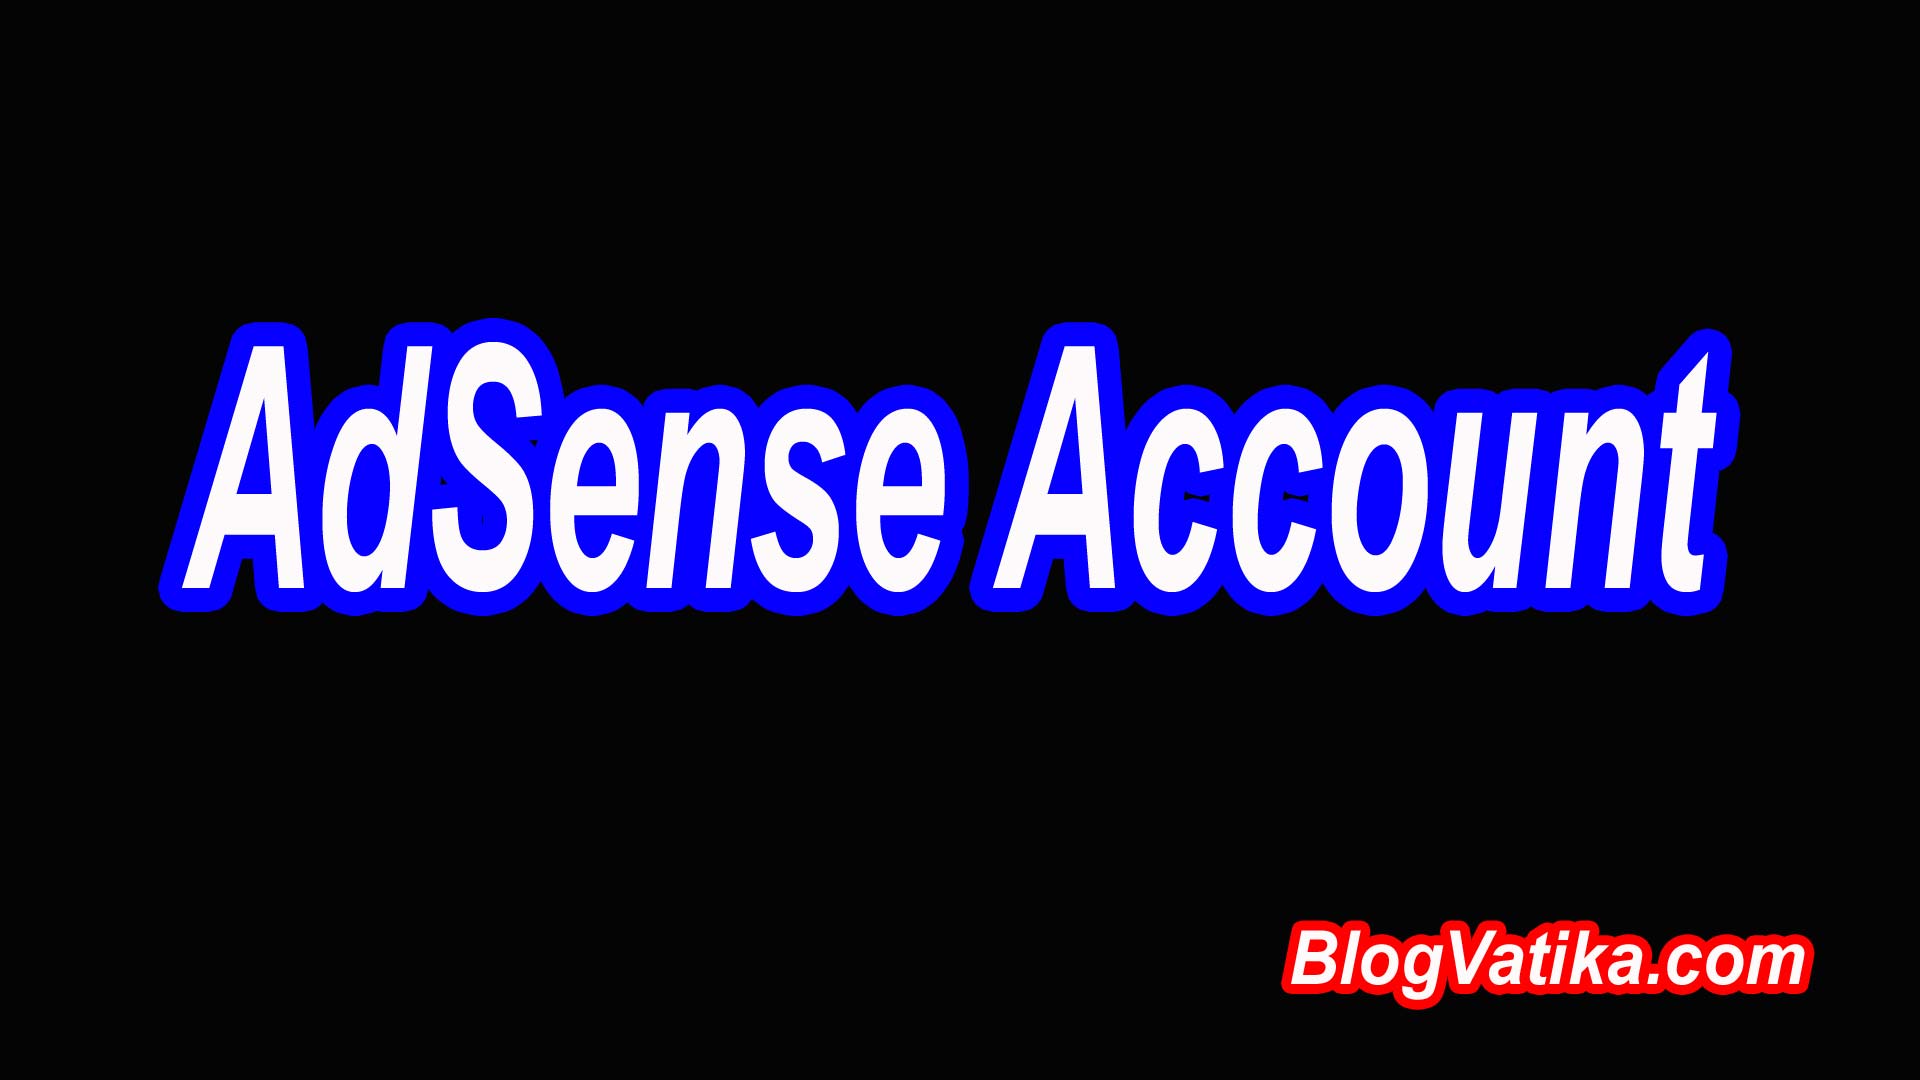 Google AdSense Account Approved Kaise Kare